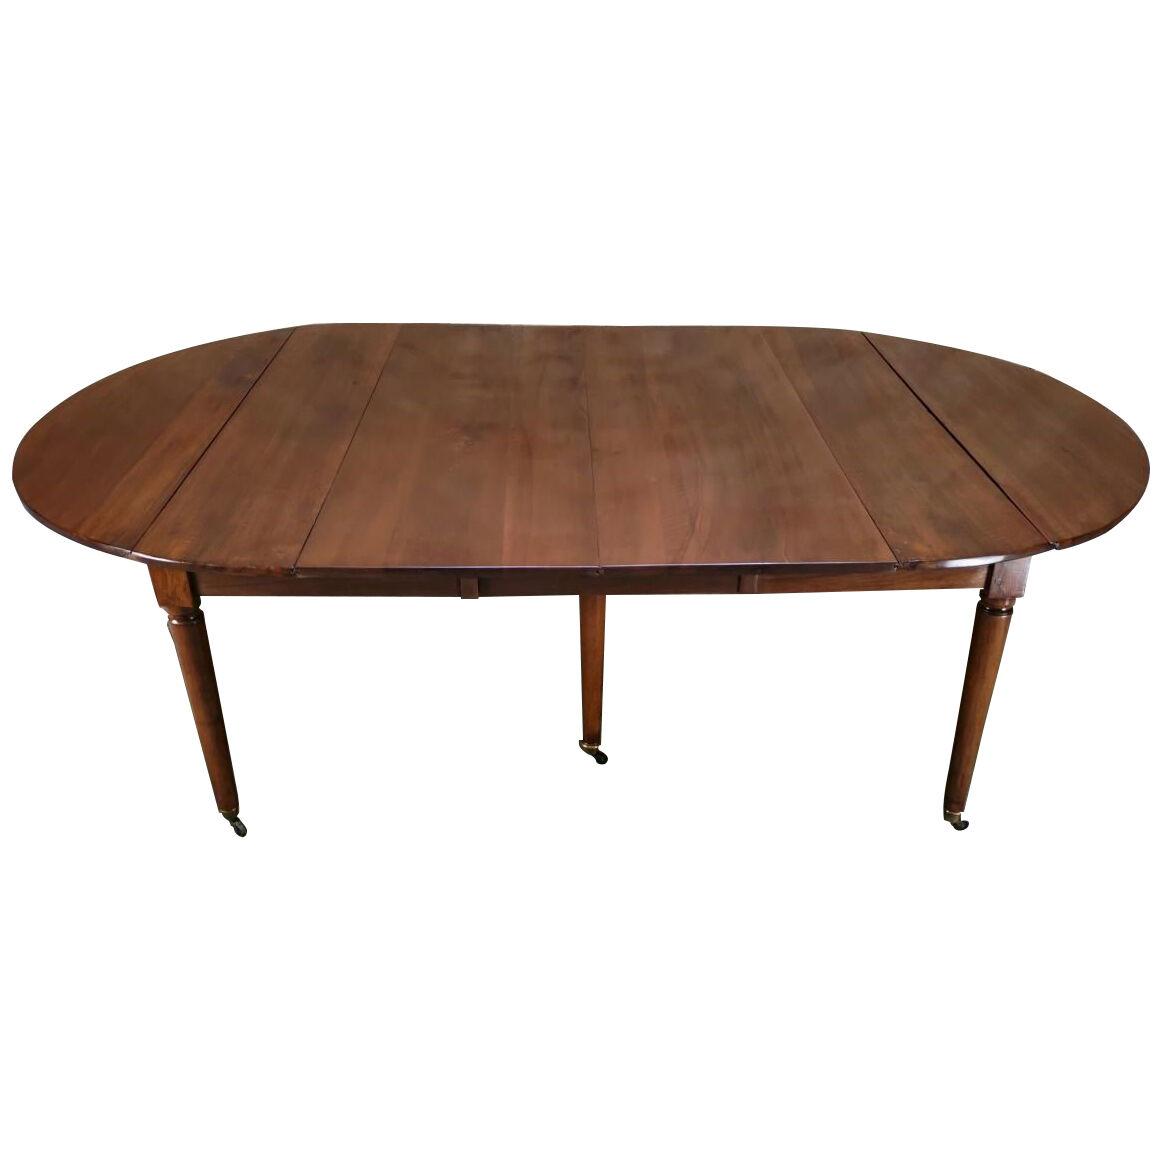 Circa 1760 Louis XVI Walnut Extension Dining Table with 3 leaves